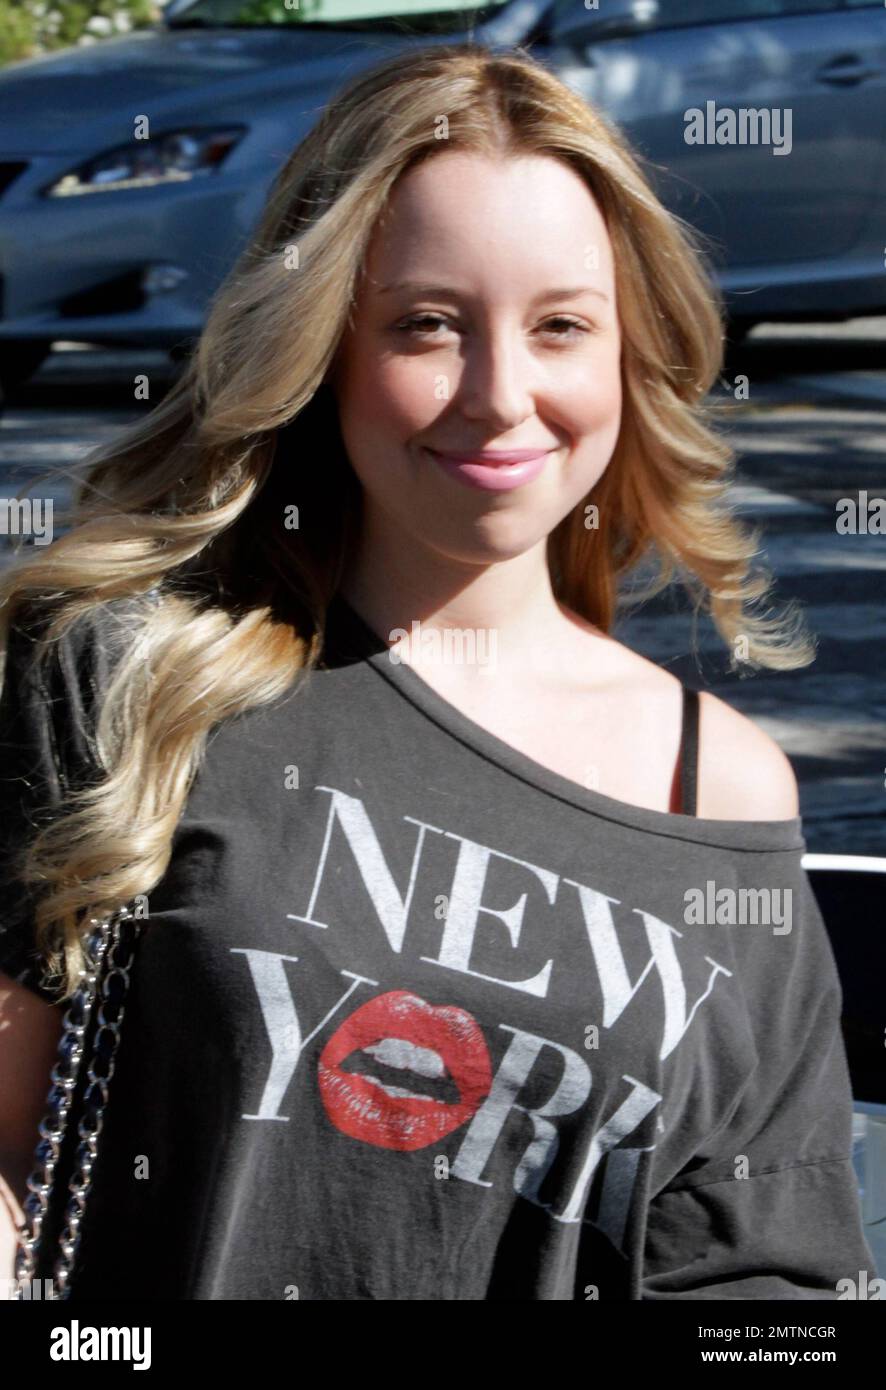 EXCLUSIVE!! - Skyler Shaye, goddaughter to actor Jon Voight, was seen leaving Ken Paves Salon in a black off the shoulder t shirt with New York printed on it, black leggings and paired off with black sneakers. Skyler is best known for her role as Cloe in 'Bratz: The Movie.' Los Angeles, CA. 27th October 2011. Stock Photo